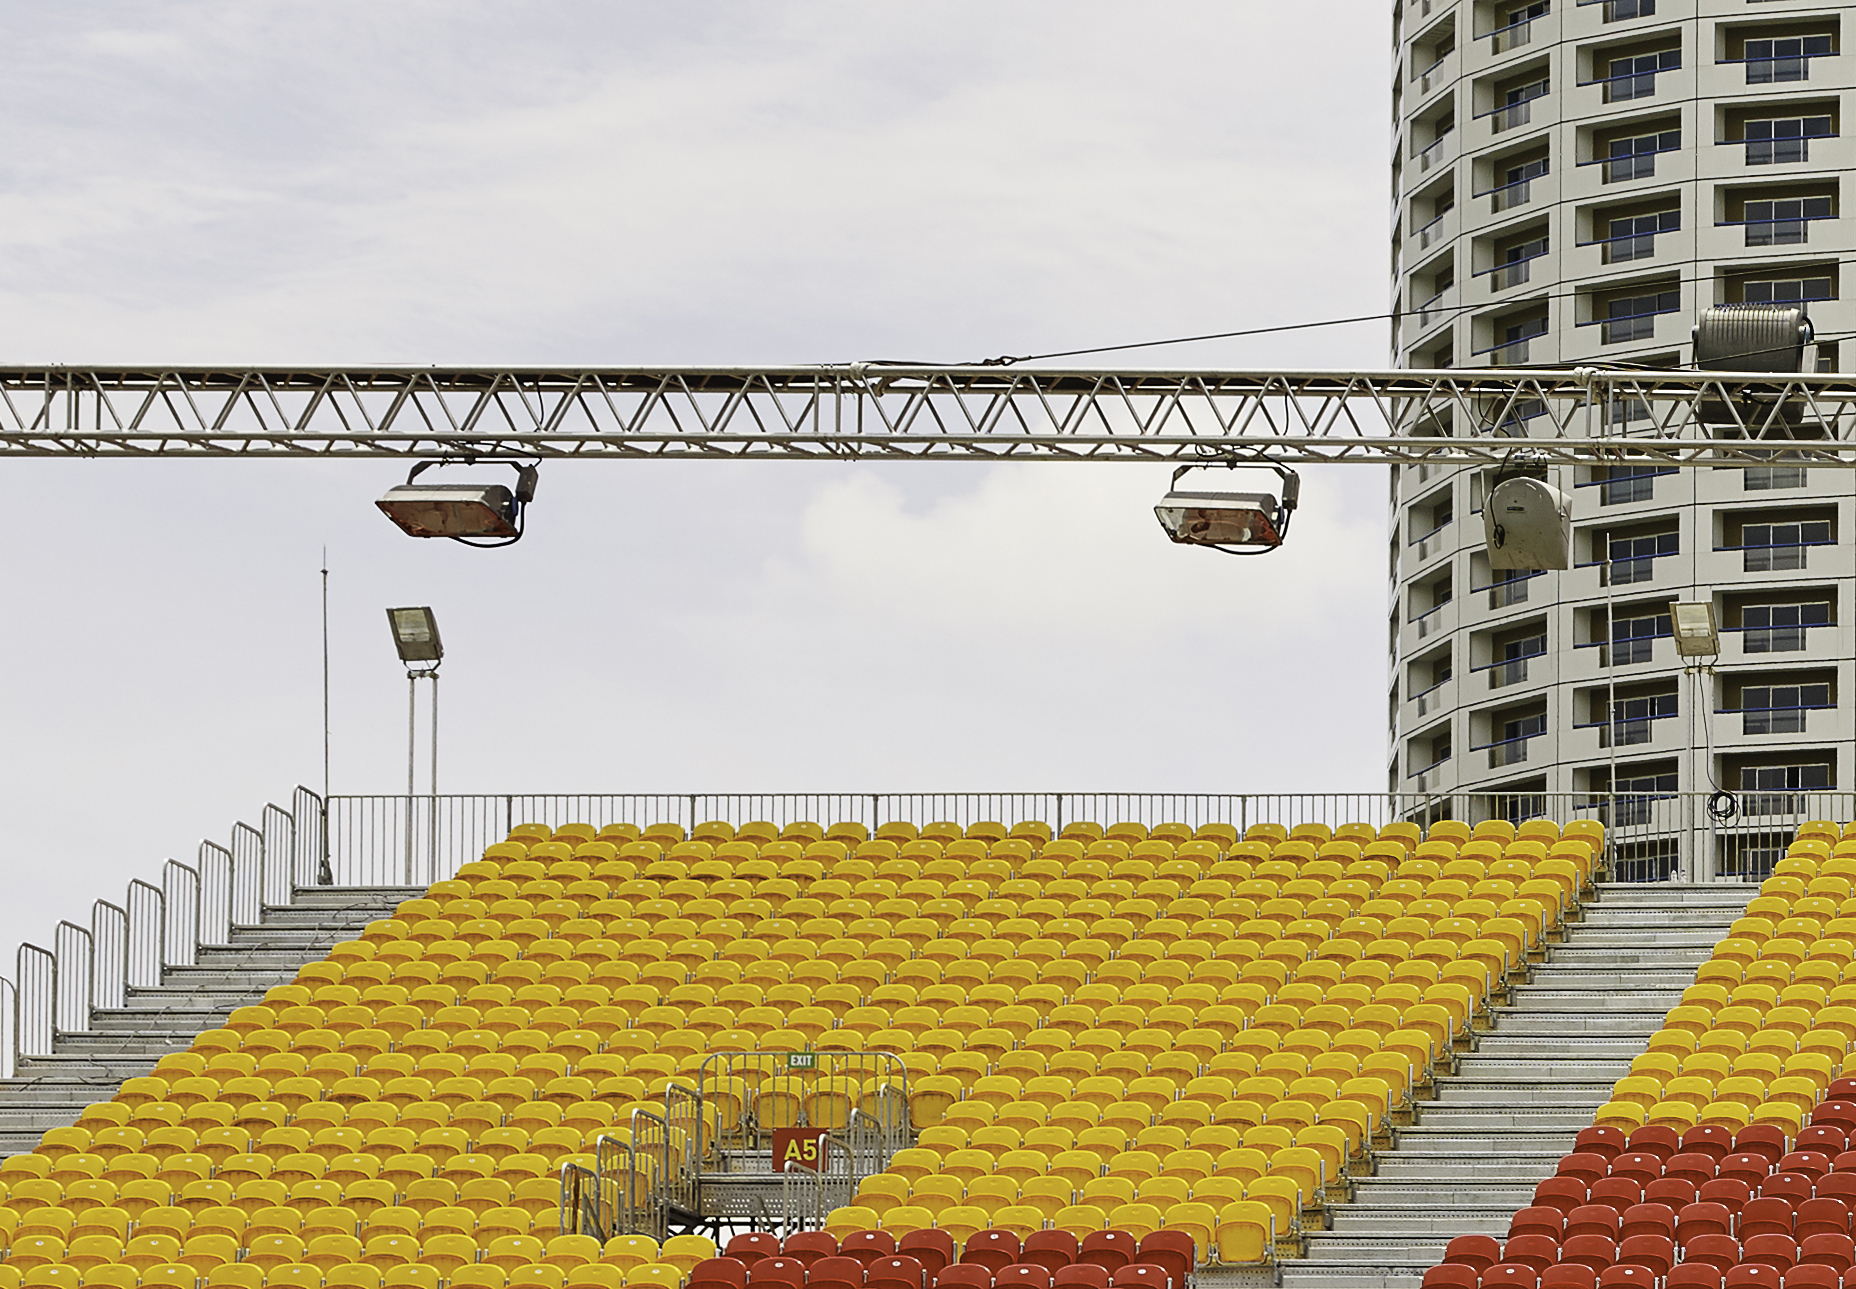  Detail from S–F1 (Grandstand_01) 